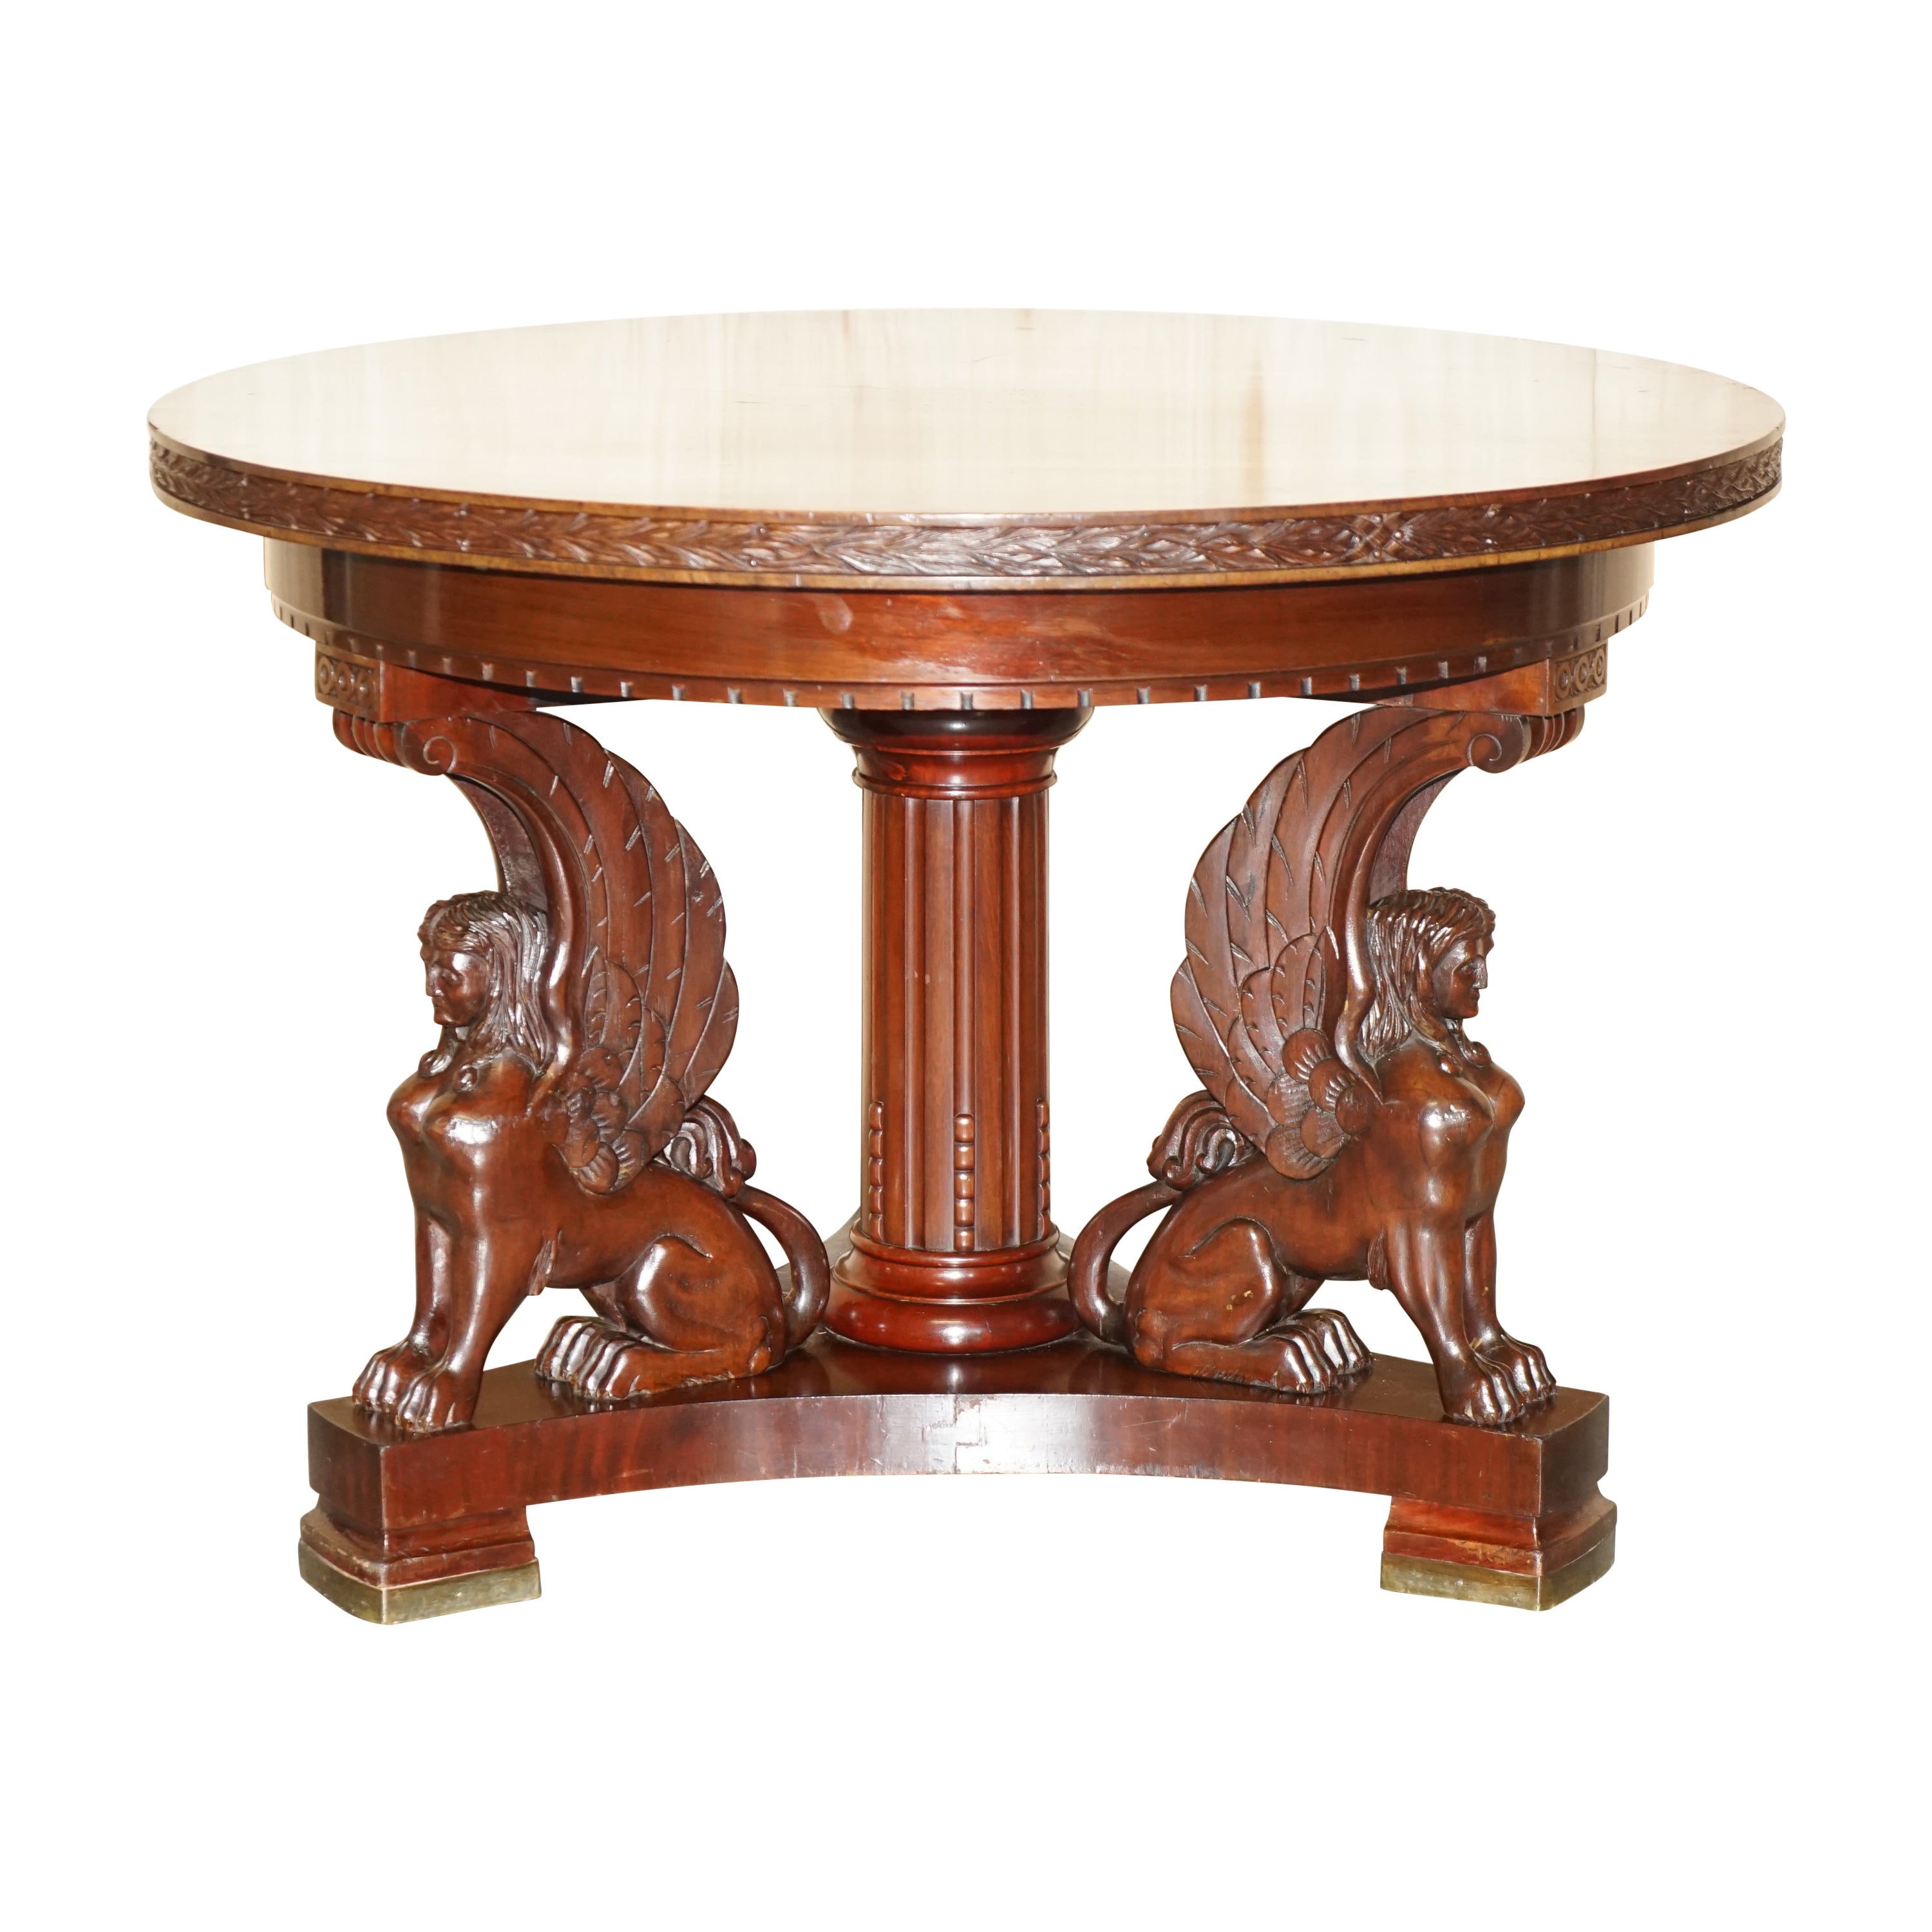 FINE ANTIQUE FRENCH NEOCLASSICAL HARDWOOD CENTRE TABLE WiTH SPHINX PILLARED BASE im Angebot